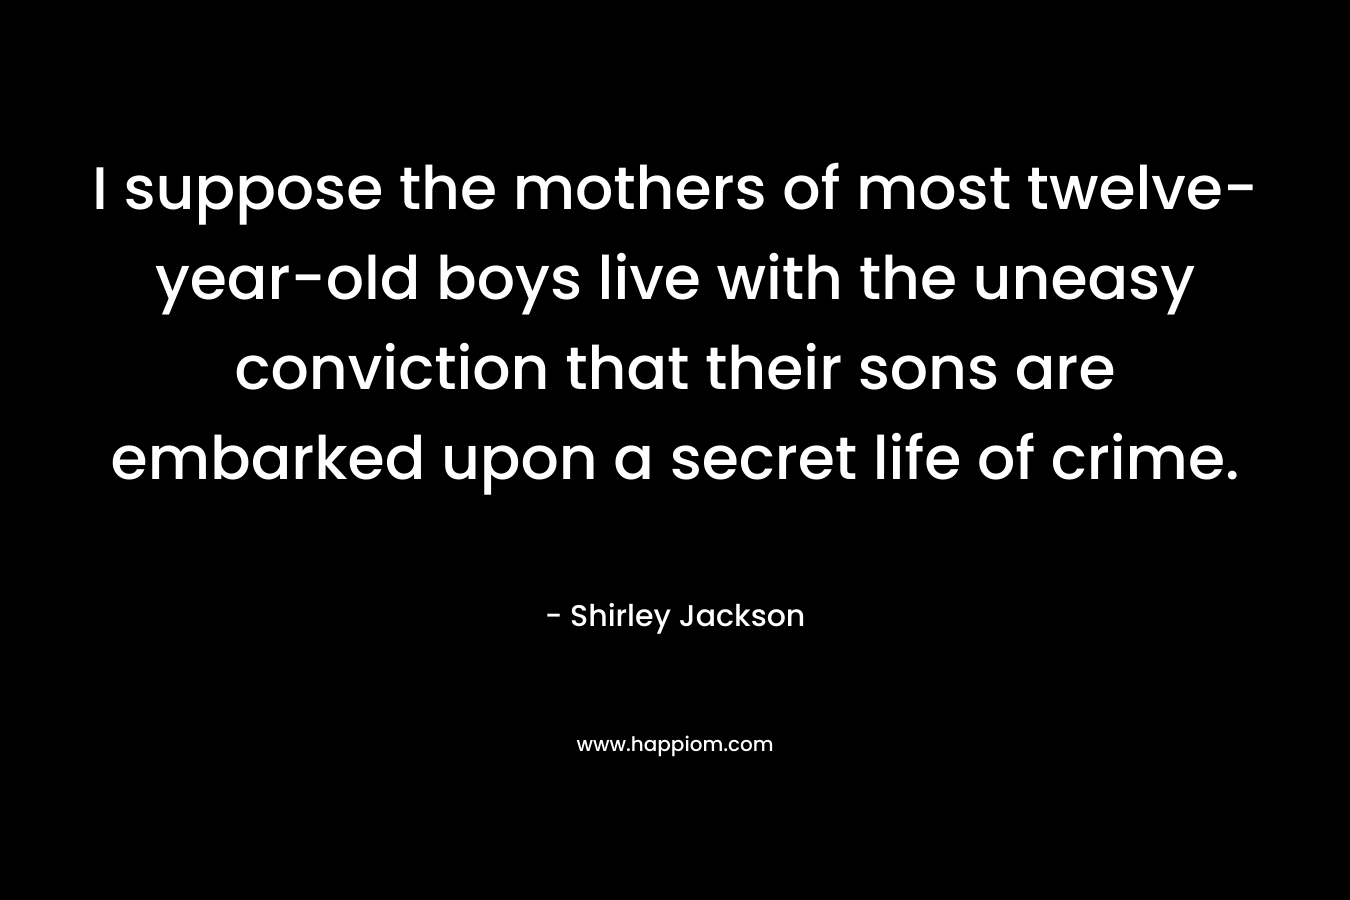 I suppose the mothers of most twelve-year-old boys live with the uneasy conviction that their sons are embarked upon a secret life of crime. – Shirley Jackson